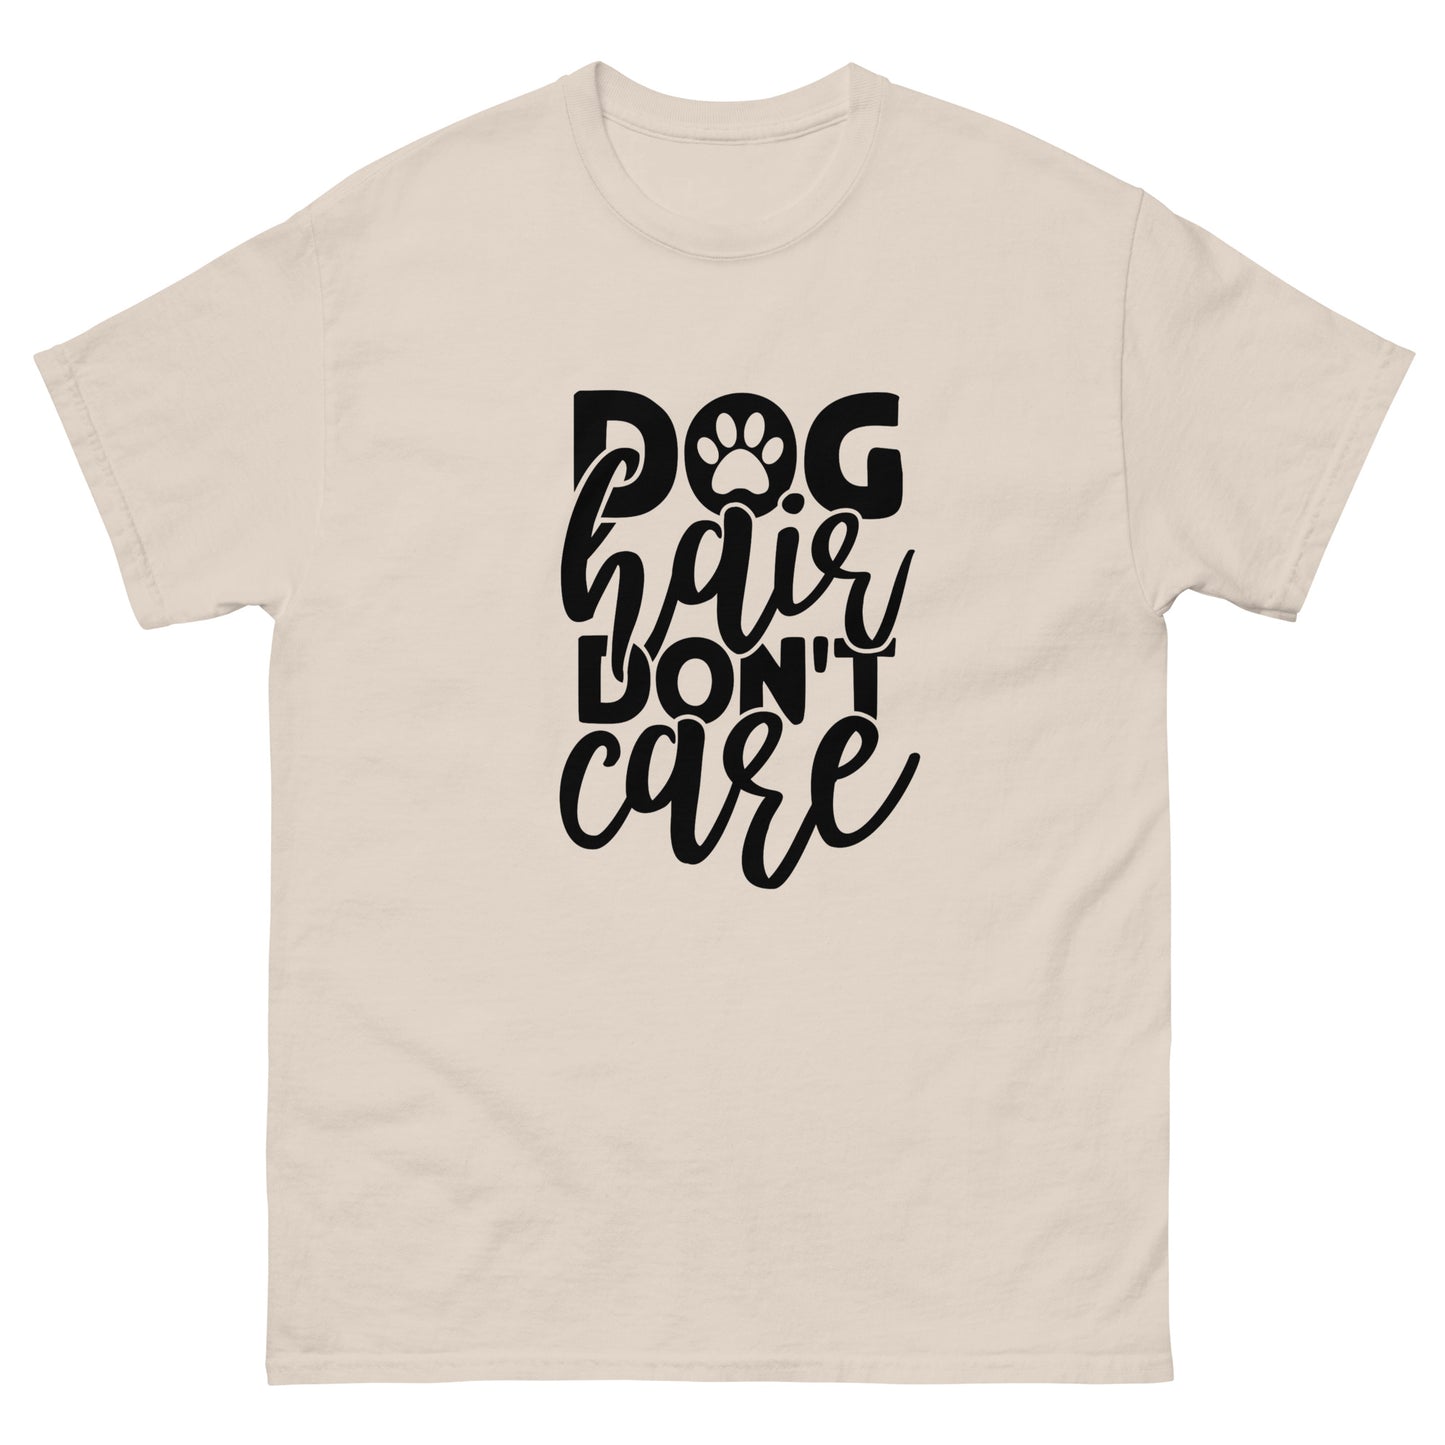 Dog Hair Don't Care classic tee